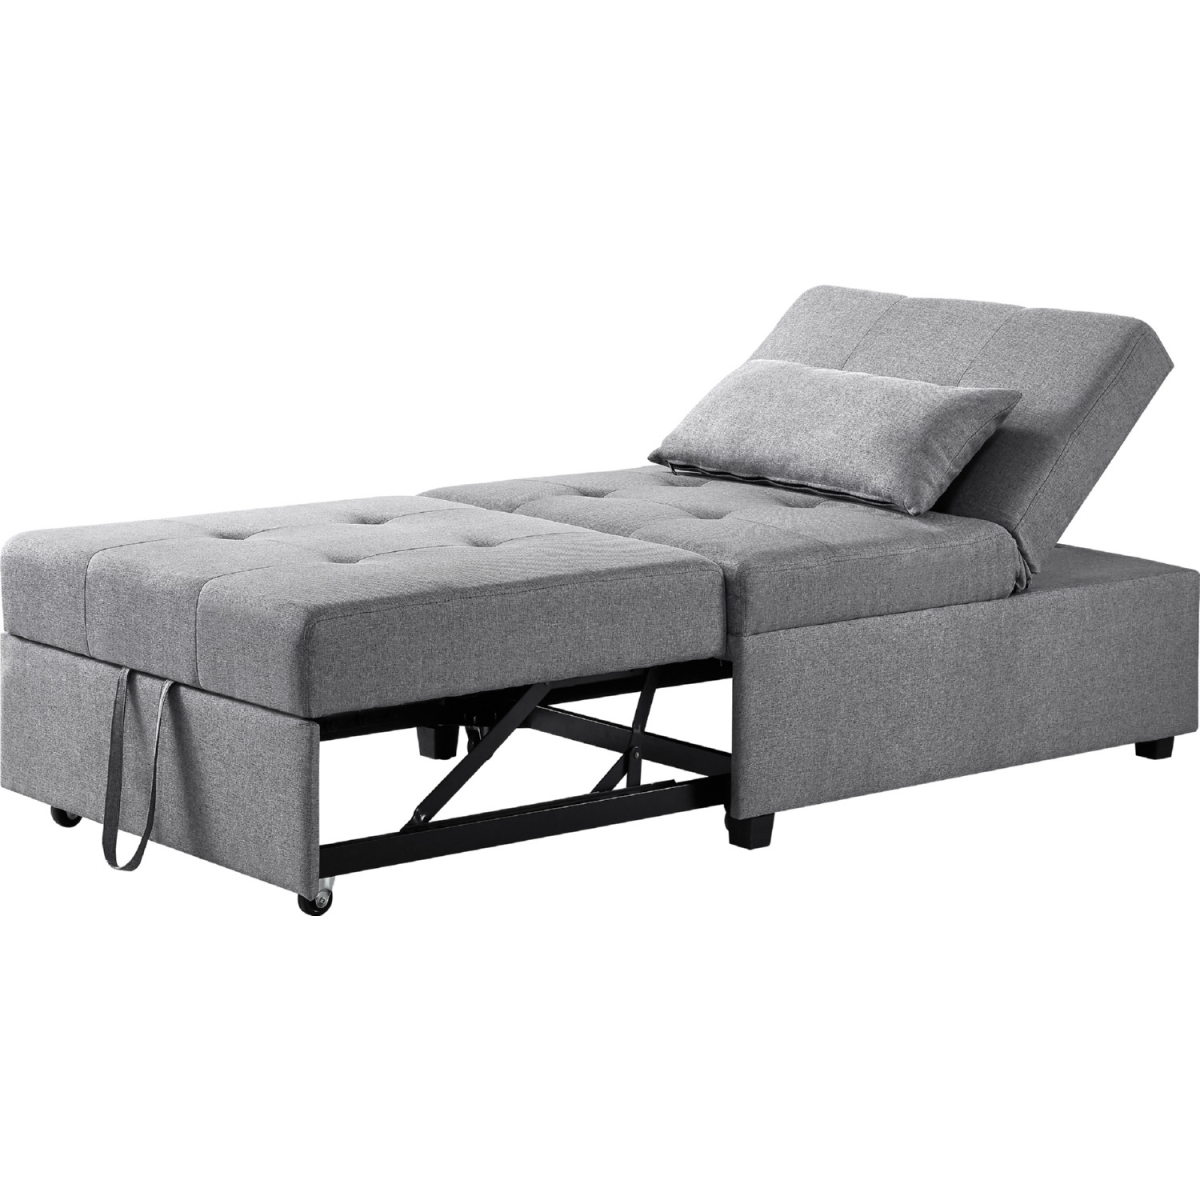 D1099s17g Boone Sofa Bed, Grey